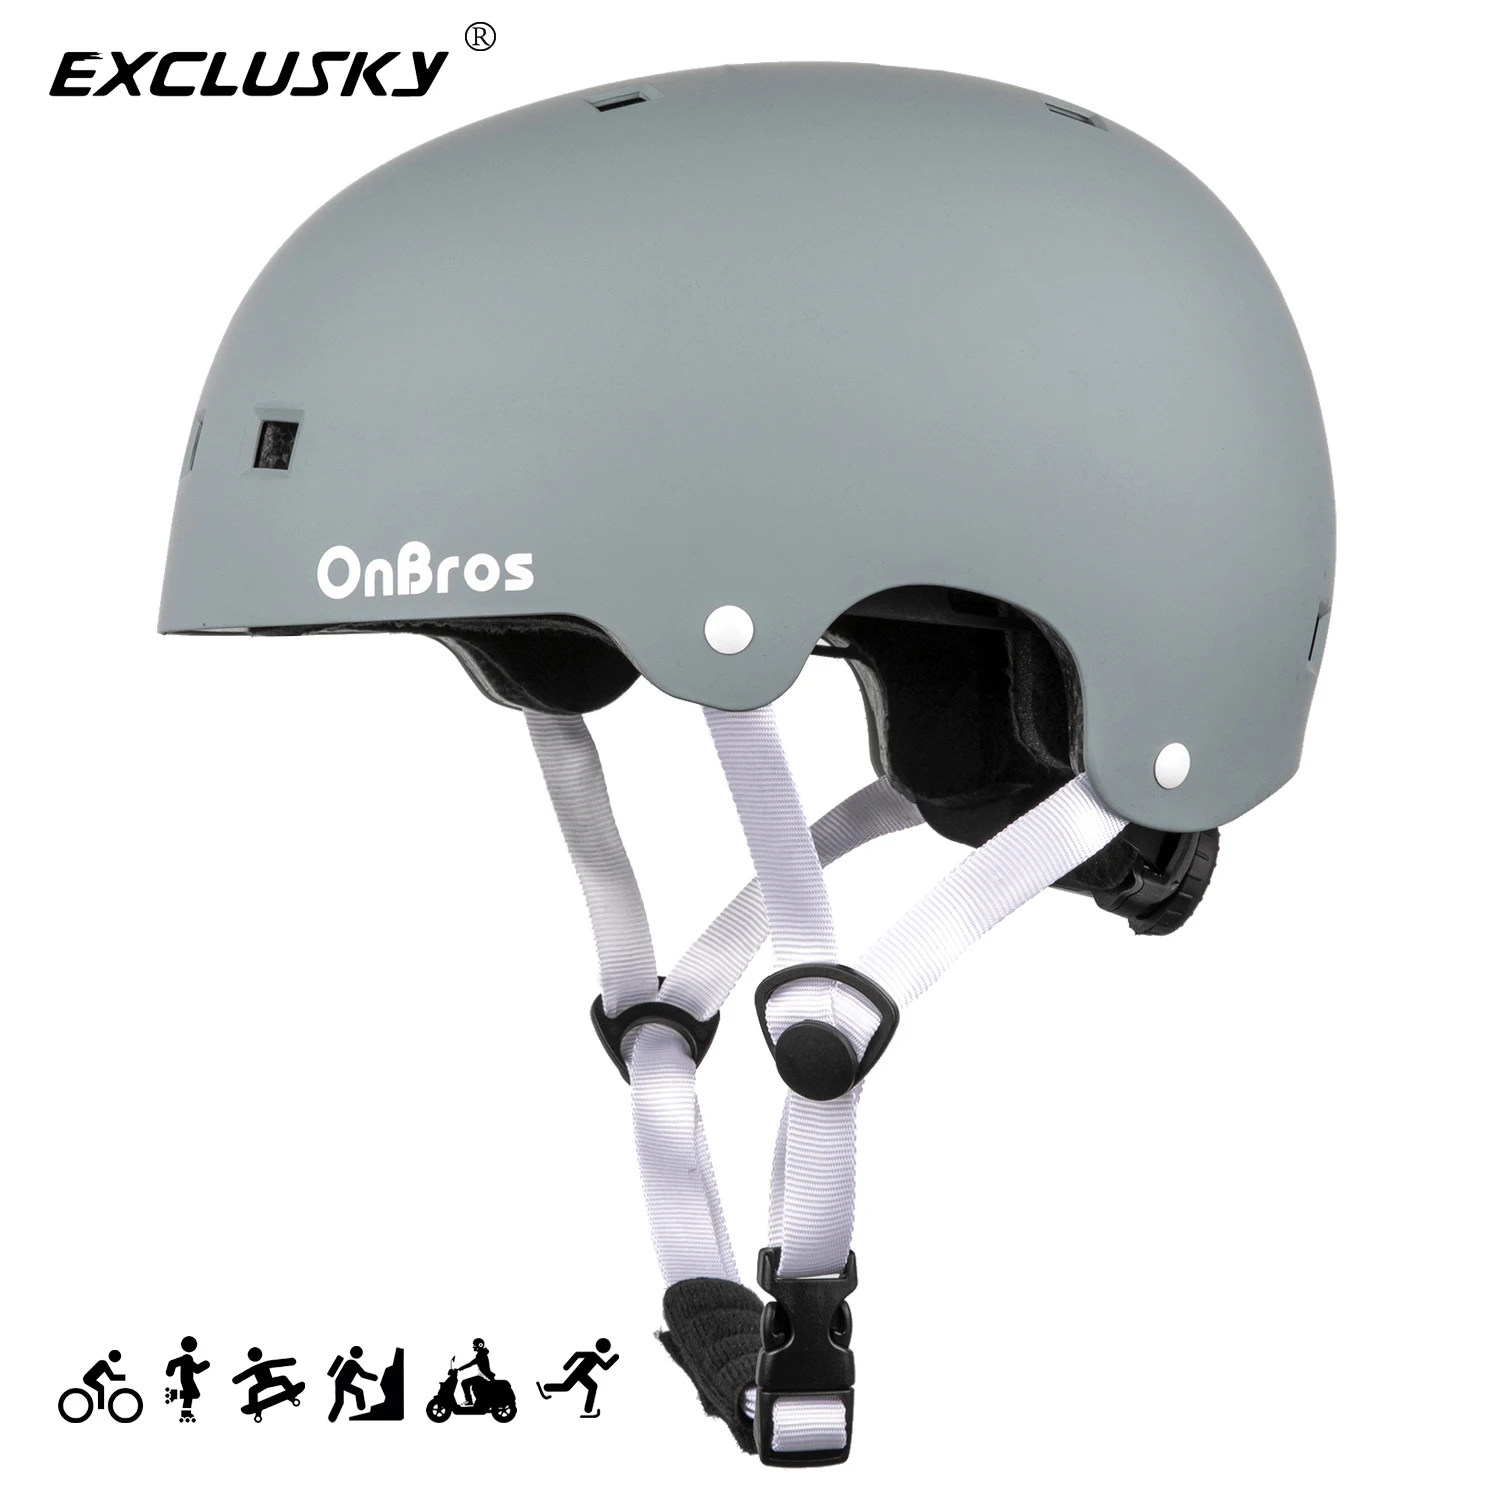 EXCLUSKY Multi-Sports BMX Skateboard Scooter Helmet Bicycle Cap for Men And Women Size M And L